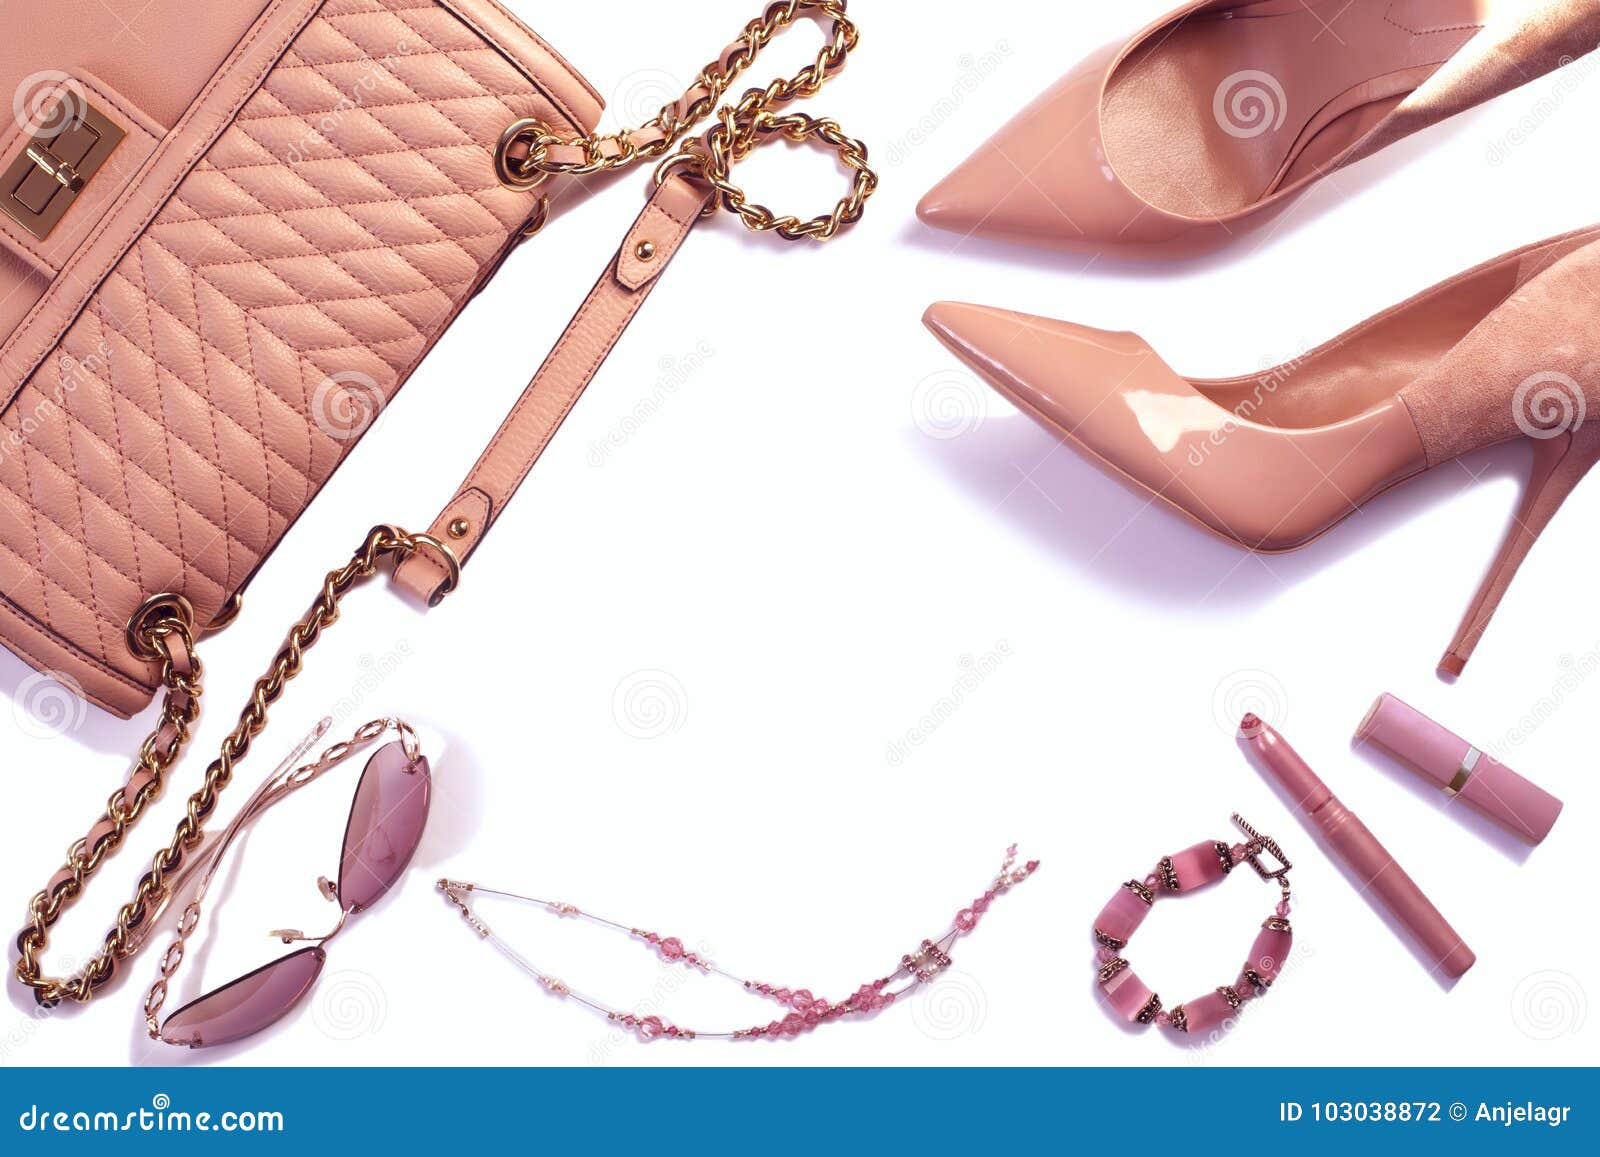 Women`s Set of Fashion Accessories in Pink Color on White Background ...